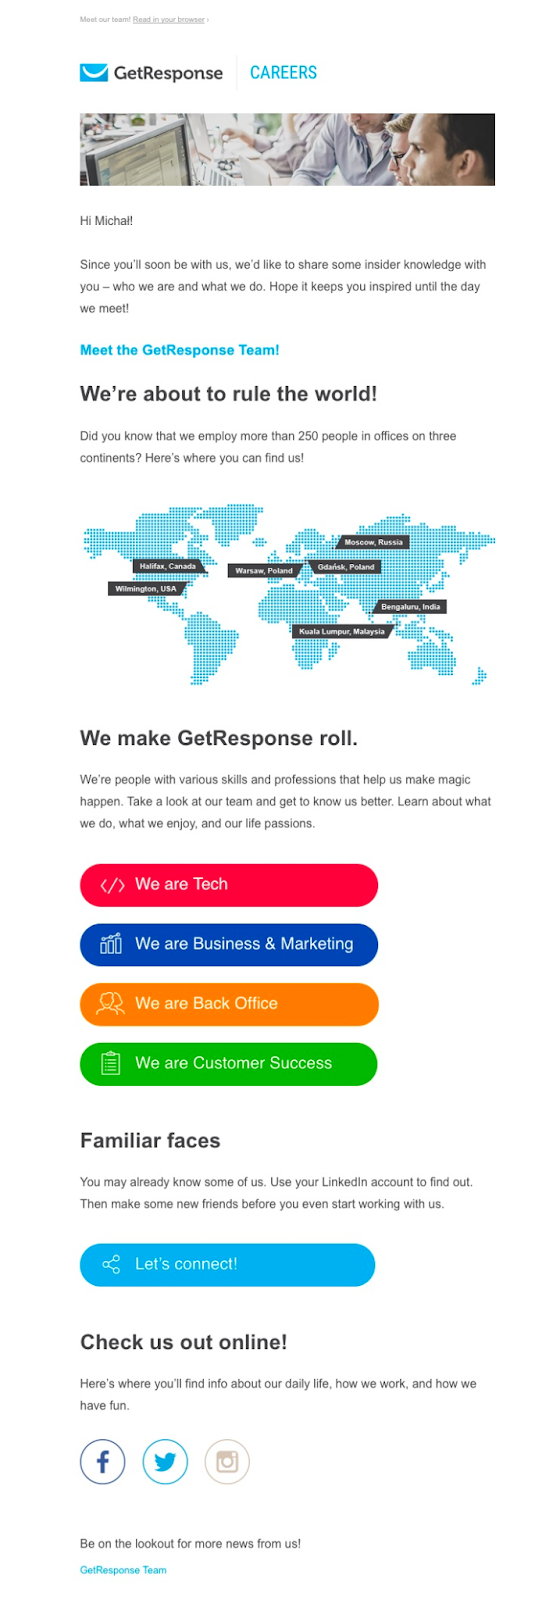 Example of an onboarding employee email newsletter sent to new GetResponse team members